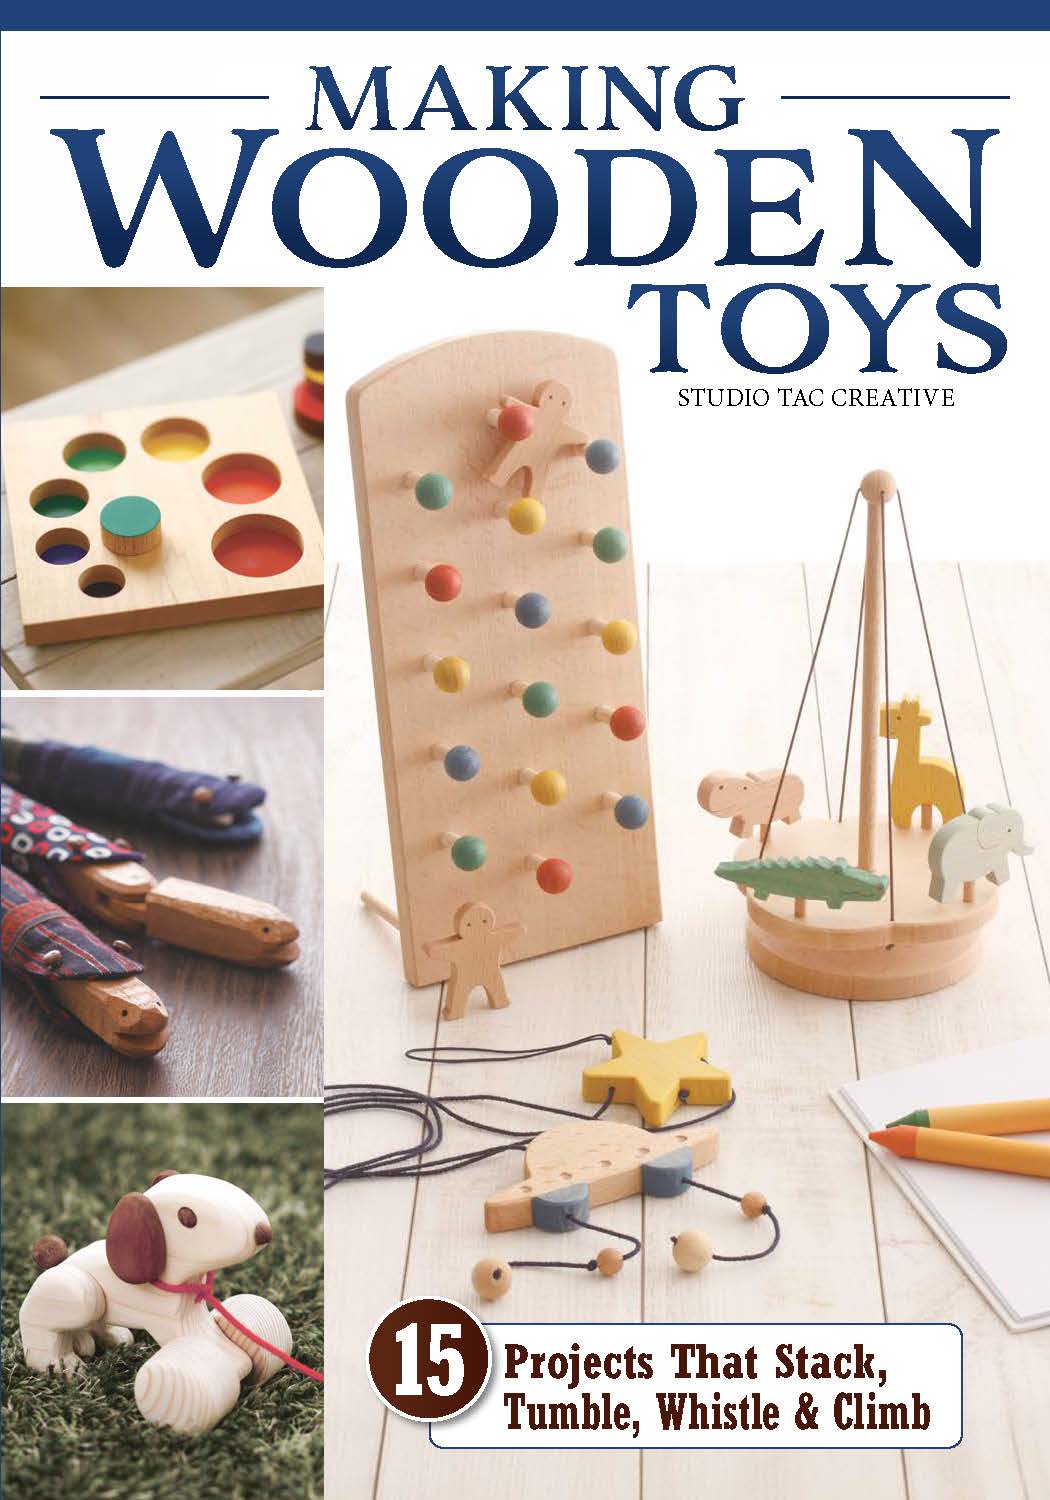 Making Wooden Toys